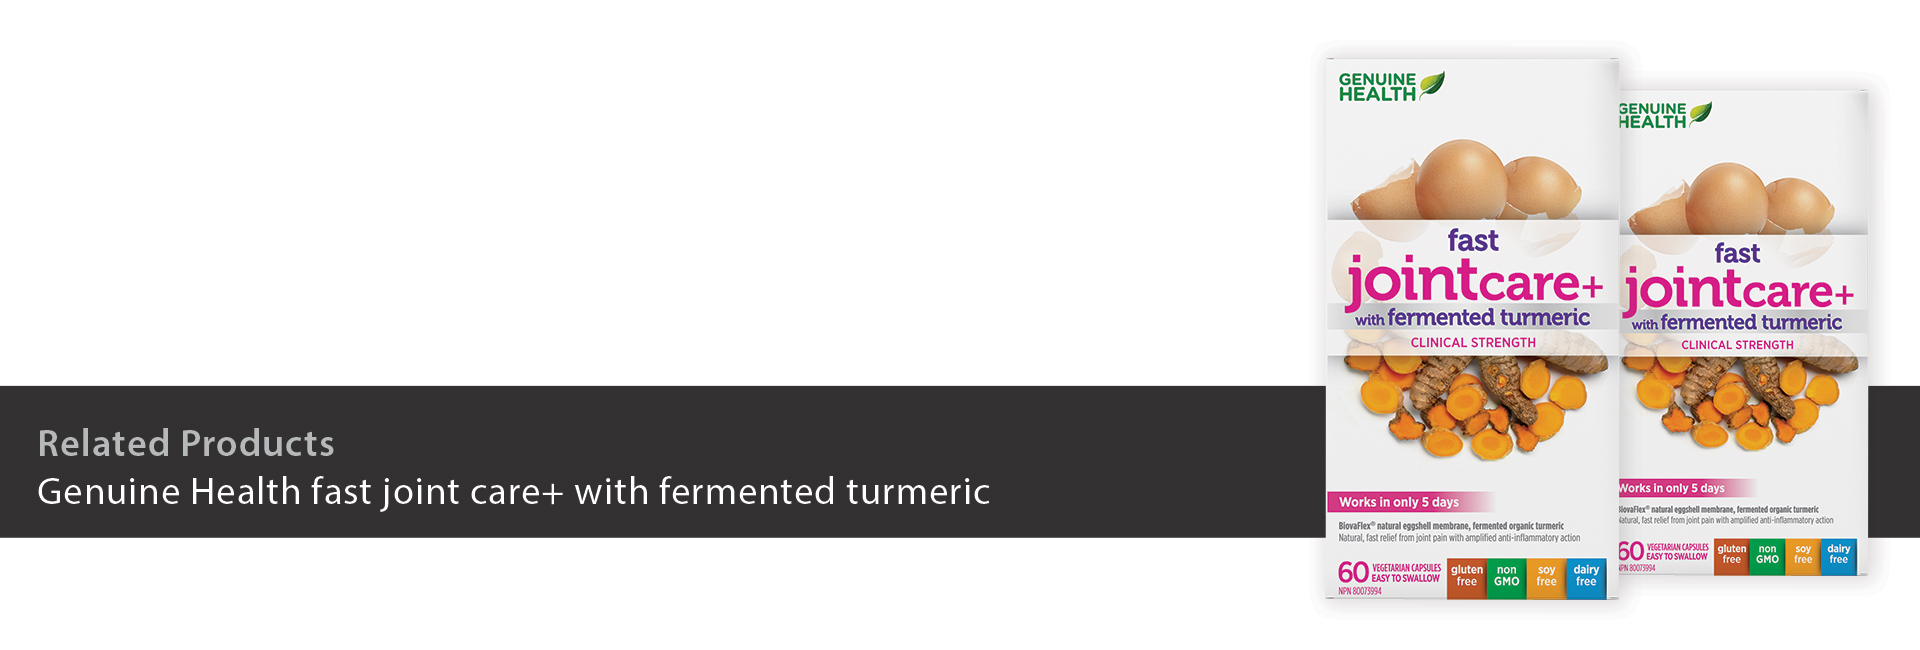 Genuine Health fast joint care+ with fermented turmeric